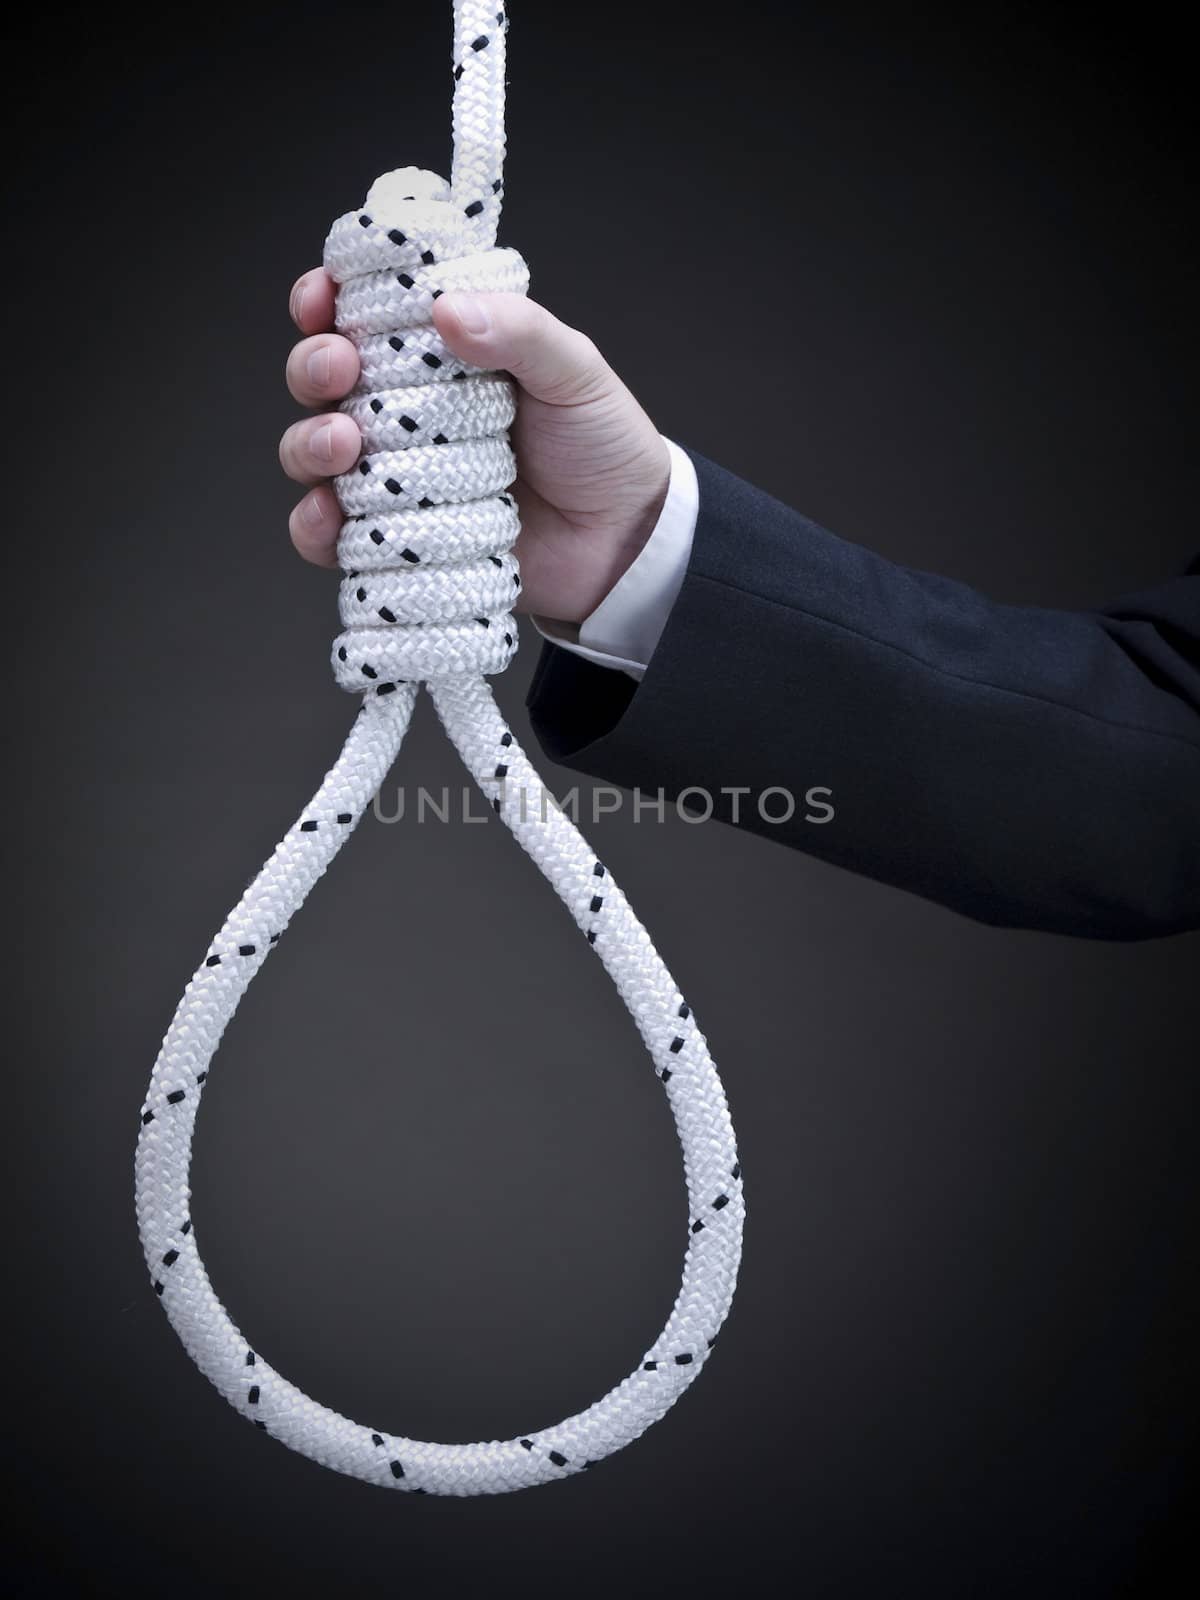 A man on a suit holds a hangman's noose over a gray background.